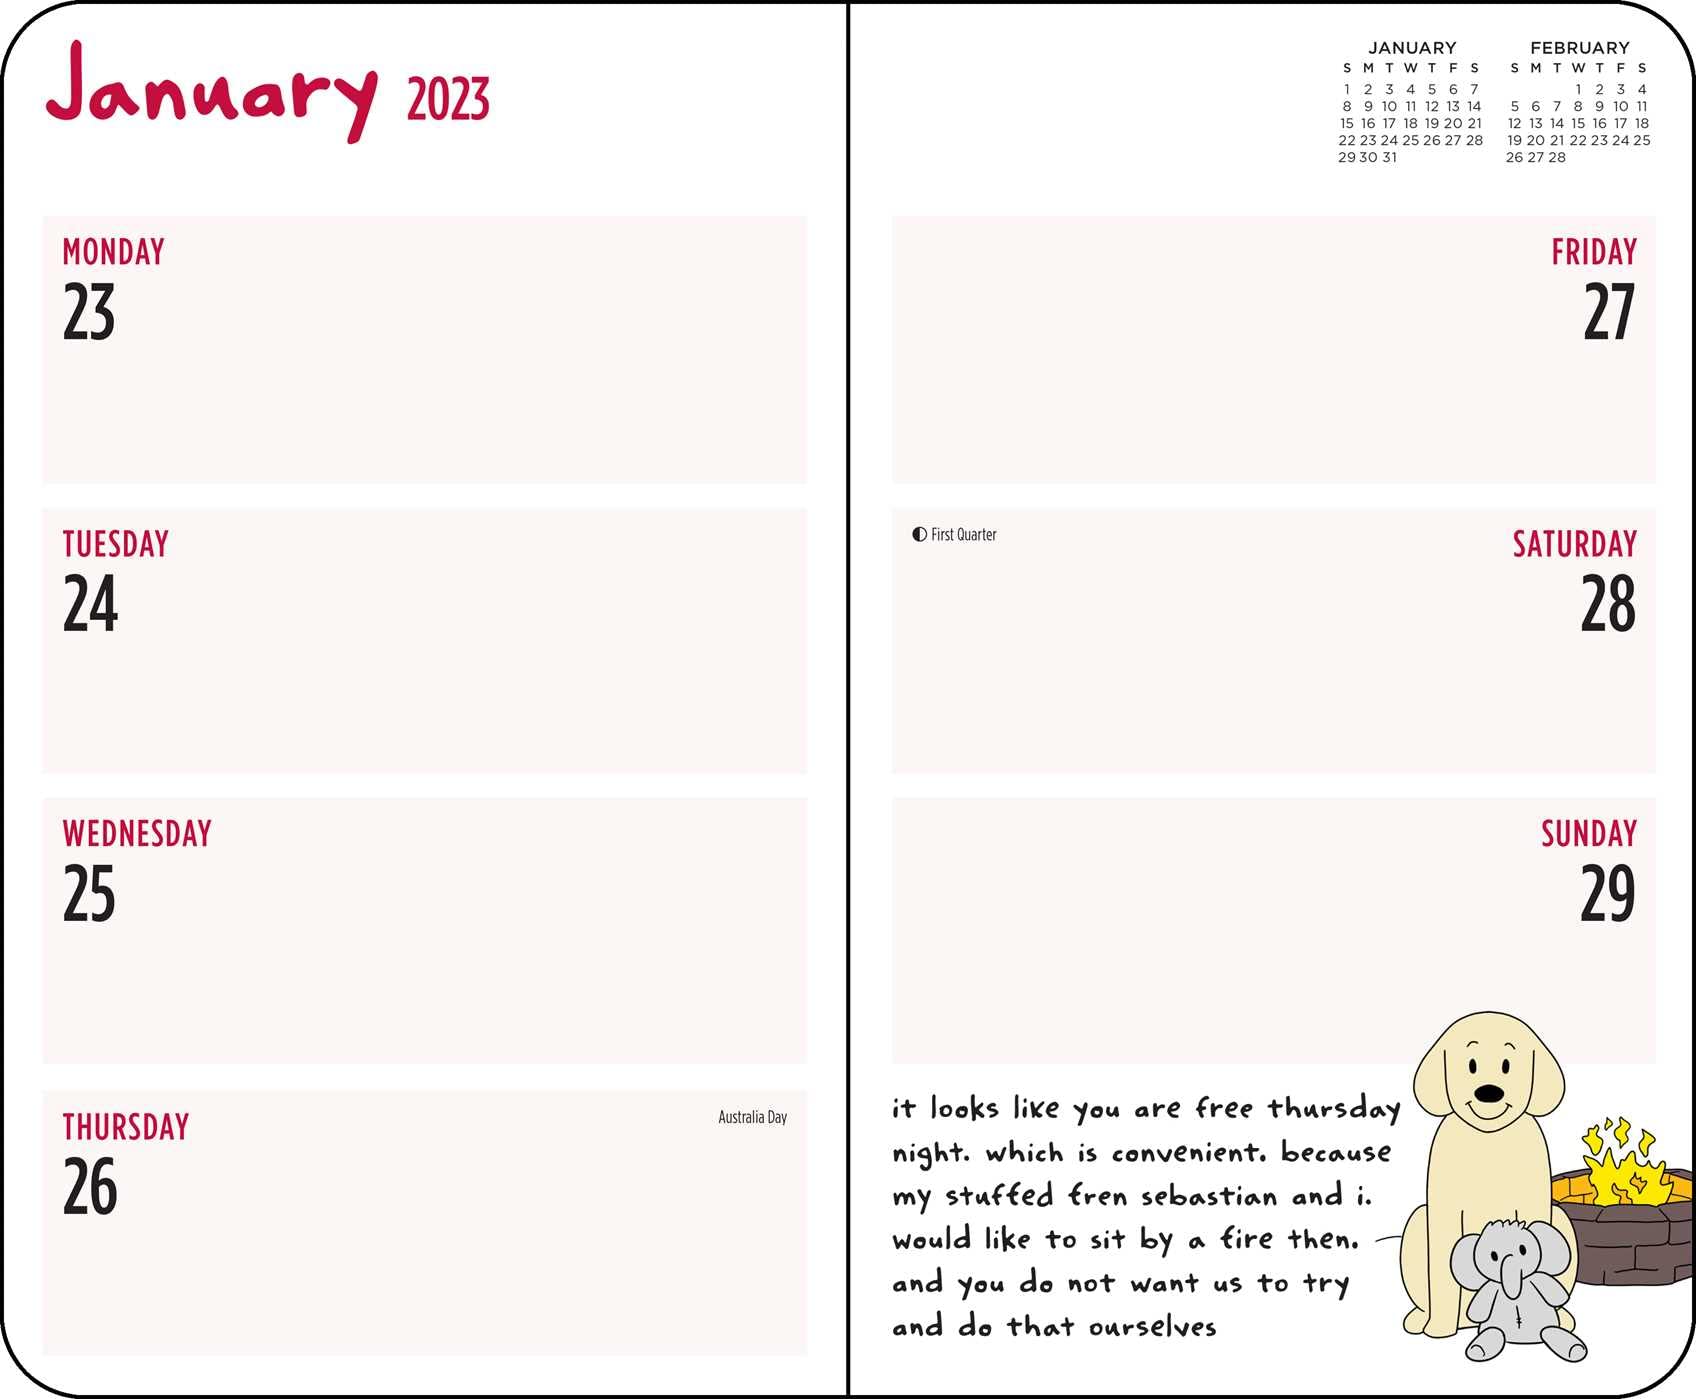 Thoughts of Dog 2023 Planner - Calendars.com